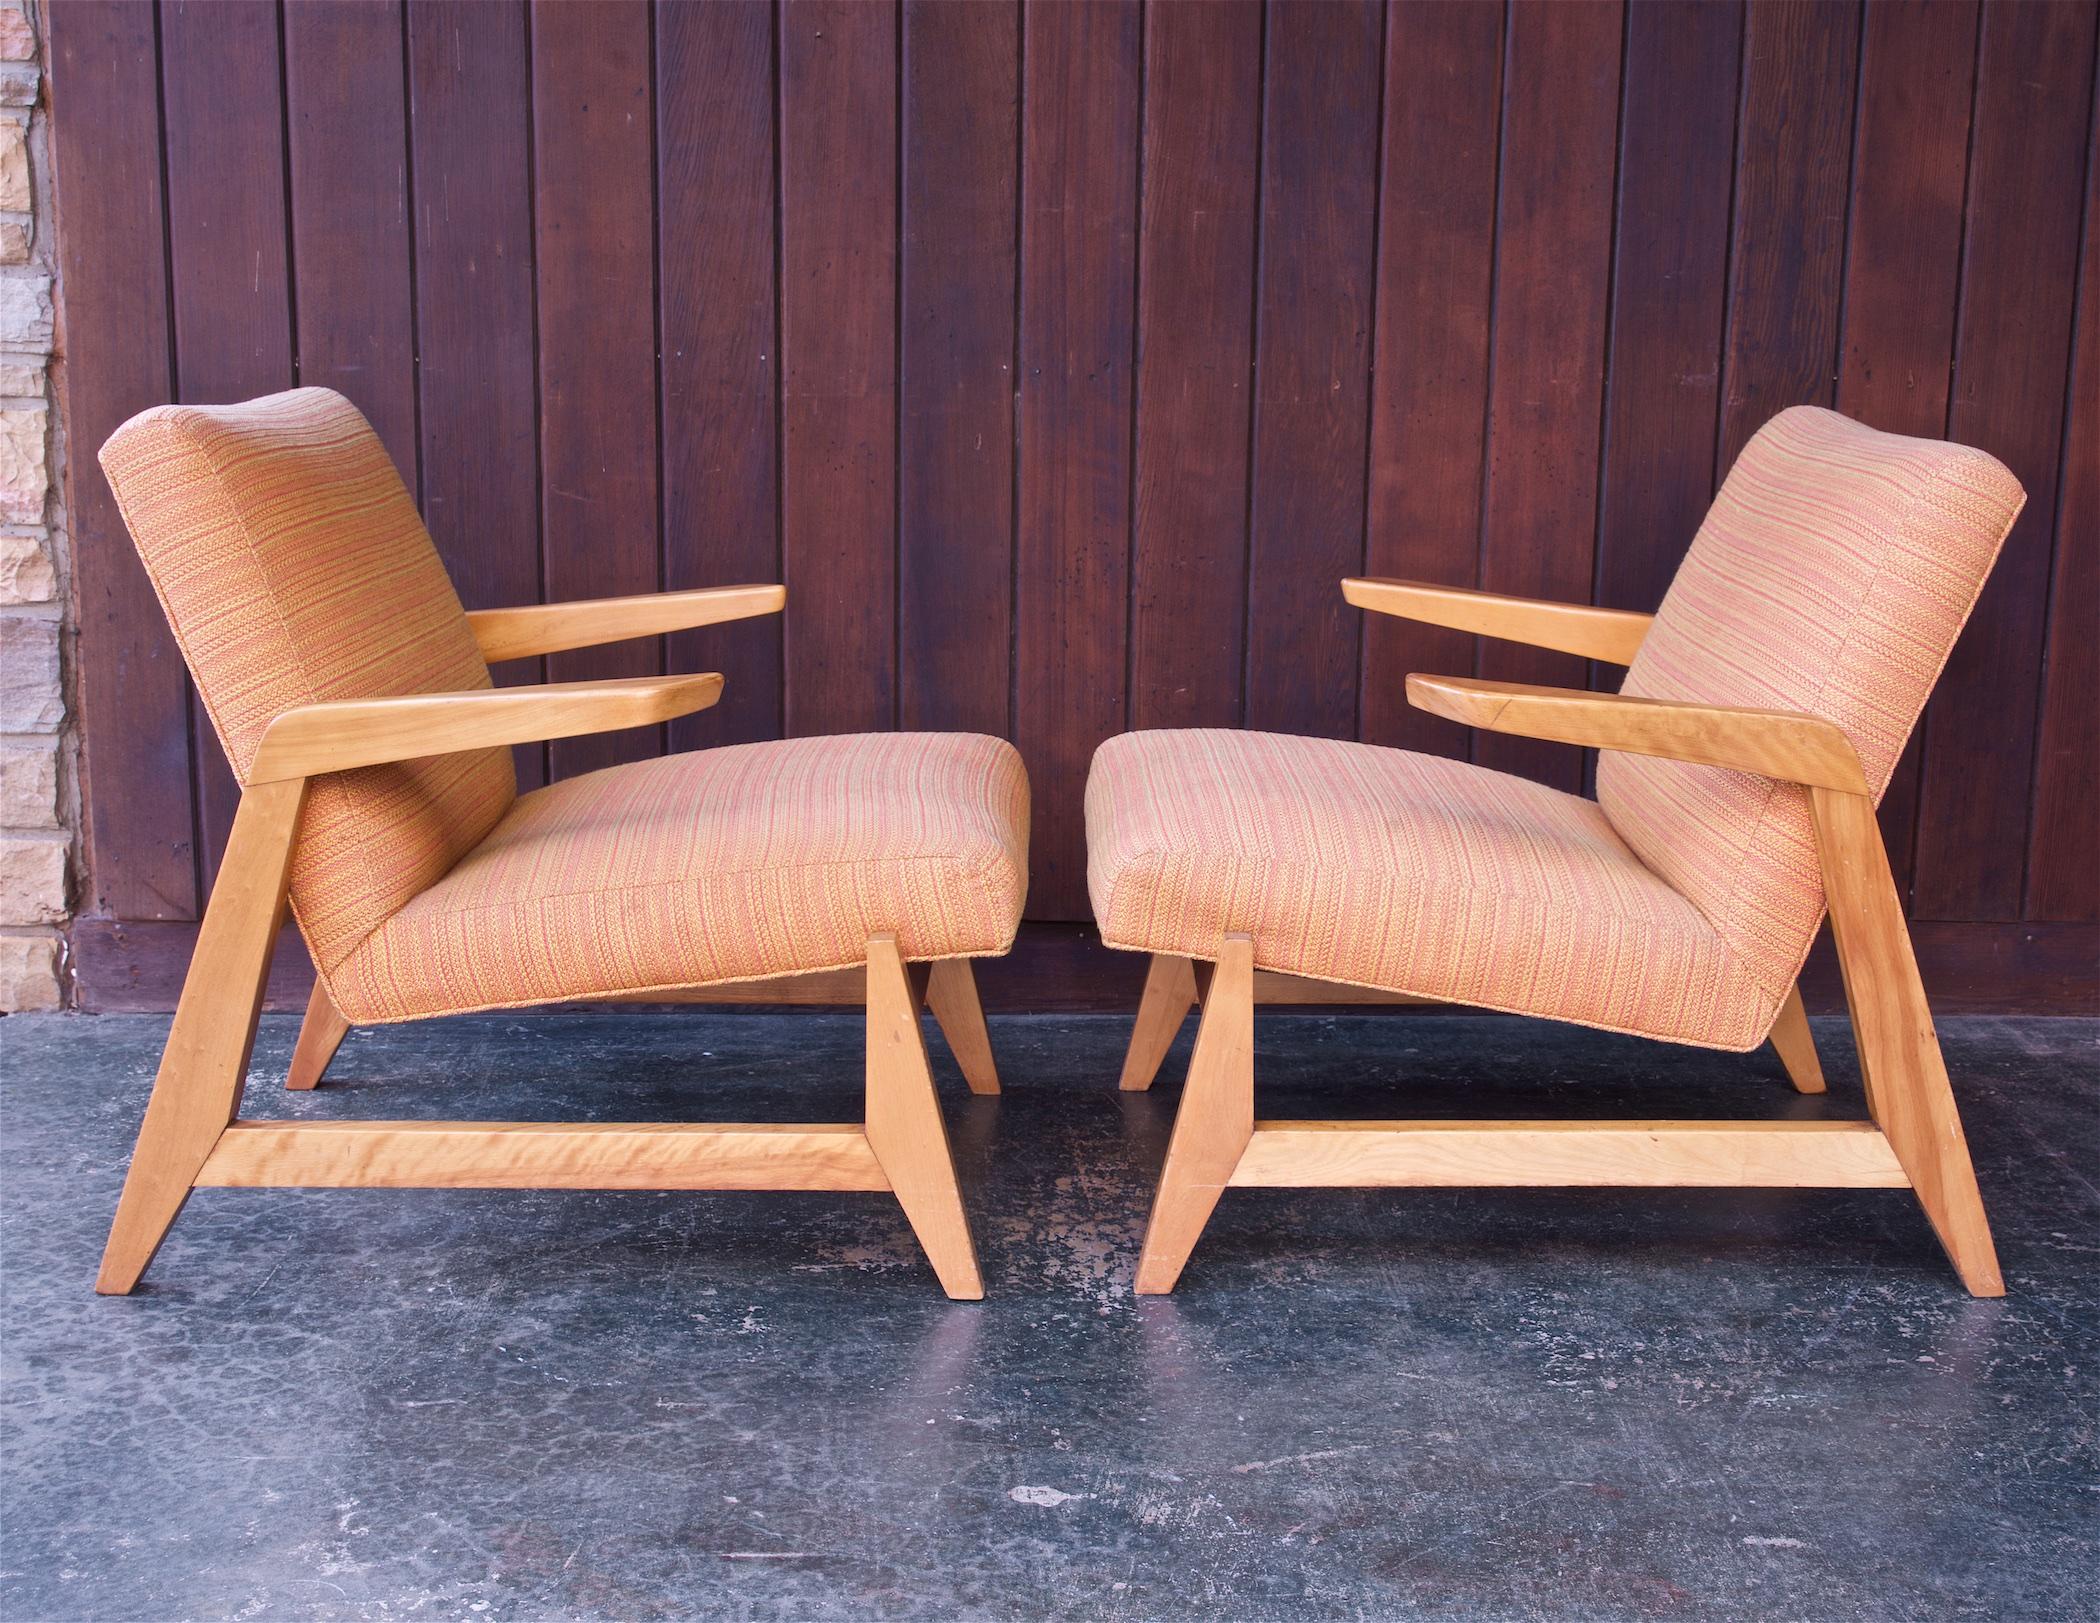 Hand-Crafted Pair Mid-Century Greenbelt Lounge Chairs by Ralph Rapson for Knoll 1940s Modern For Sale